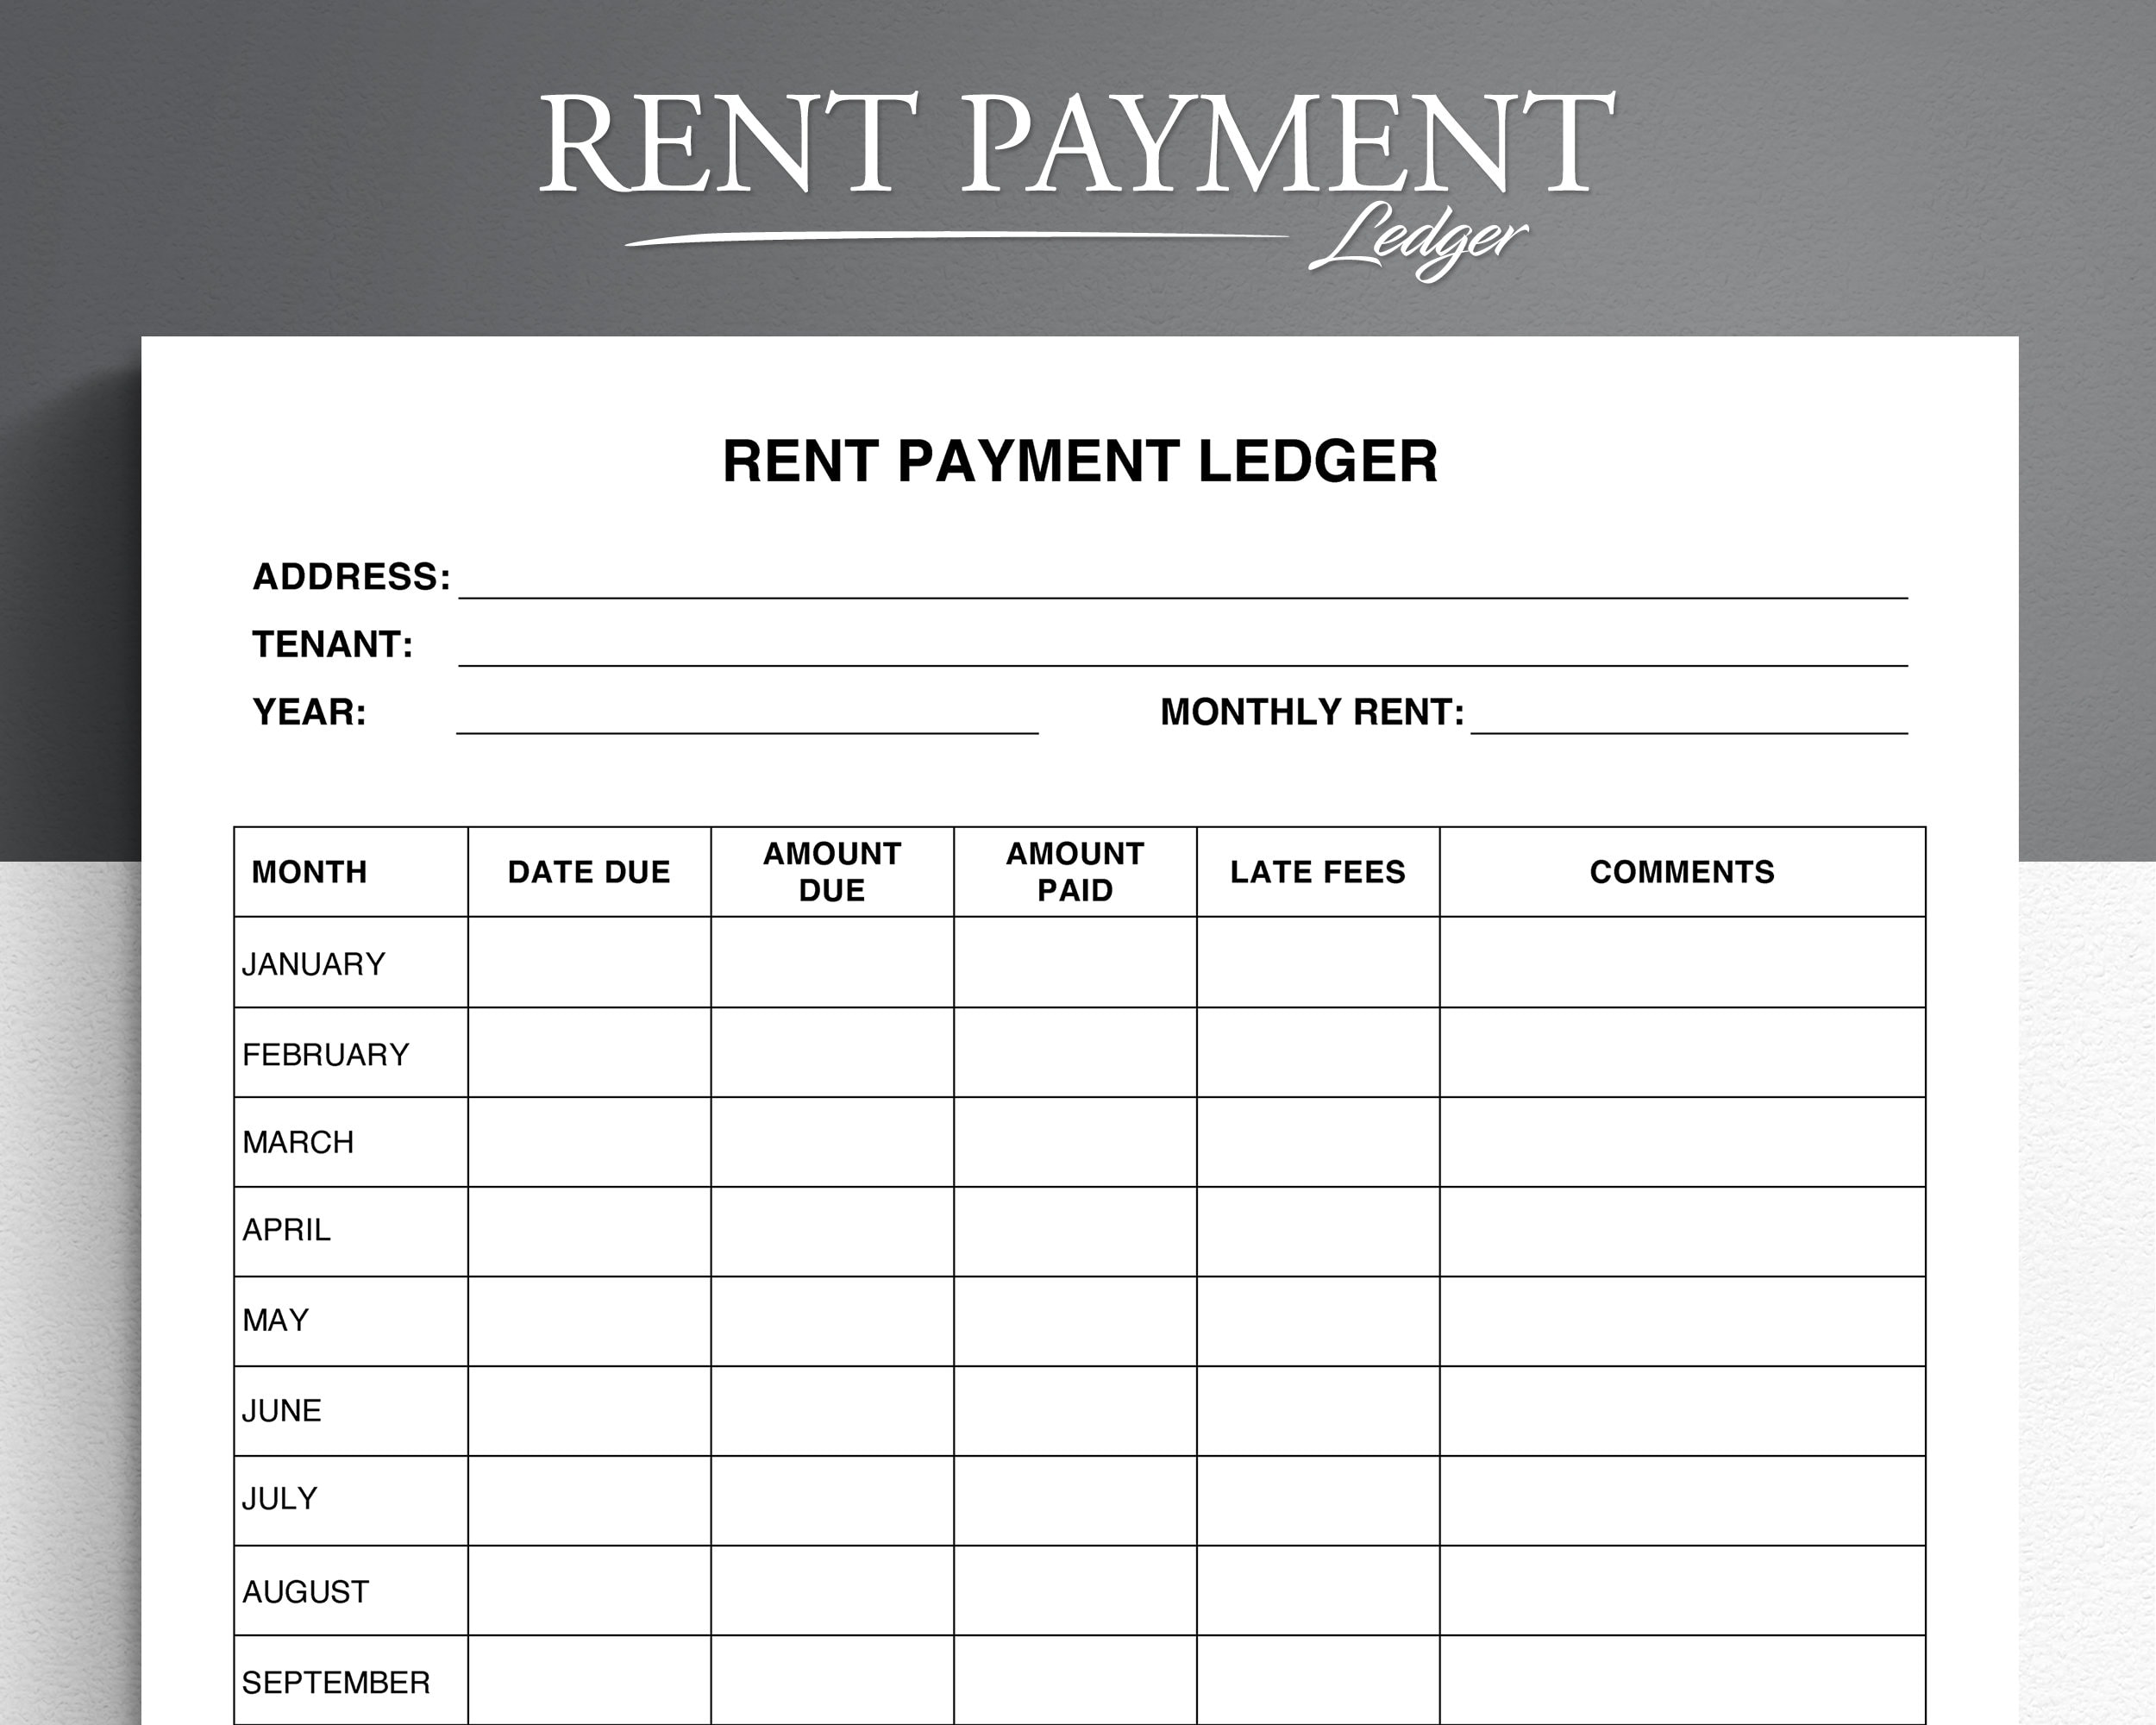 rent-payment-ledger-rental-payment-tracker-monthly-rent-etsy-uk